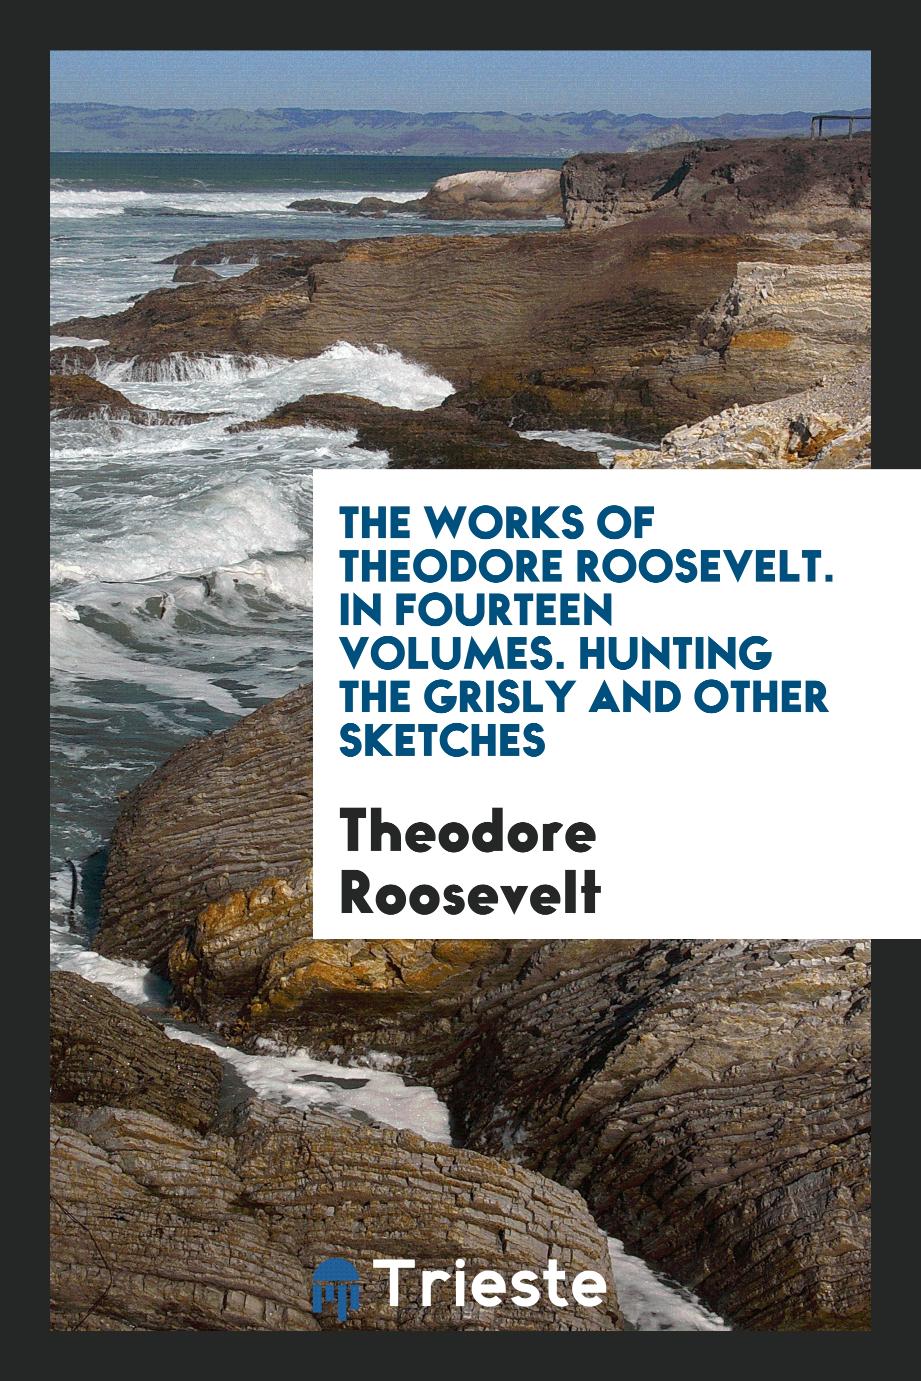 The Works of Theodore Roosevelt. In Fourteen Volumes. Hunting the Grisly and Other Sketches